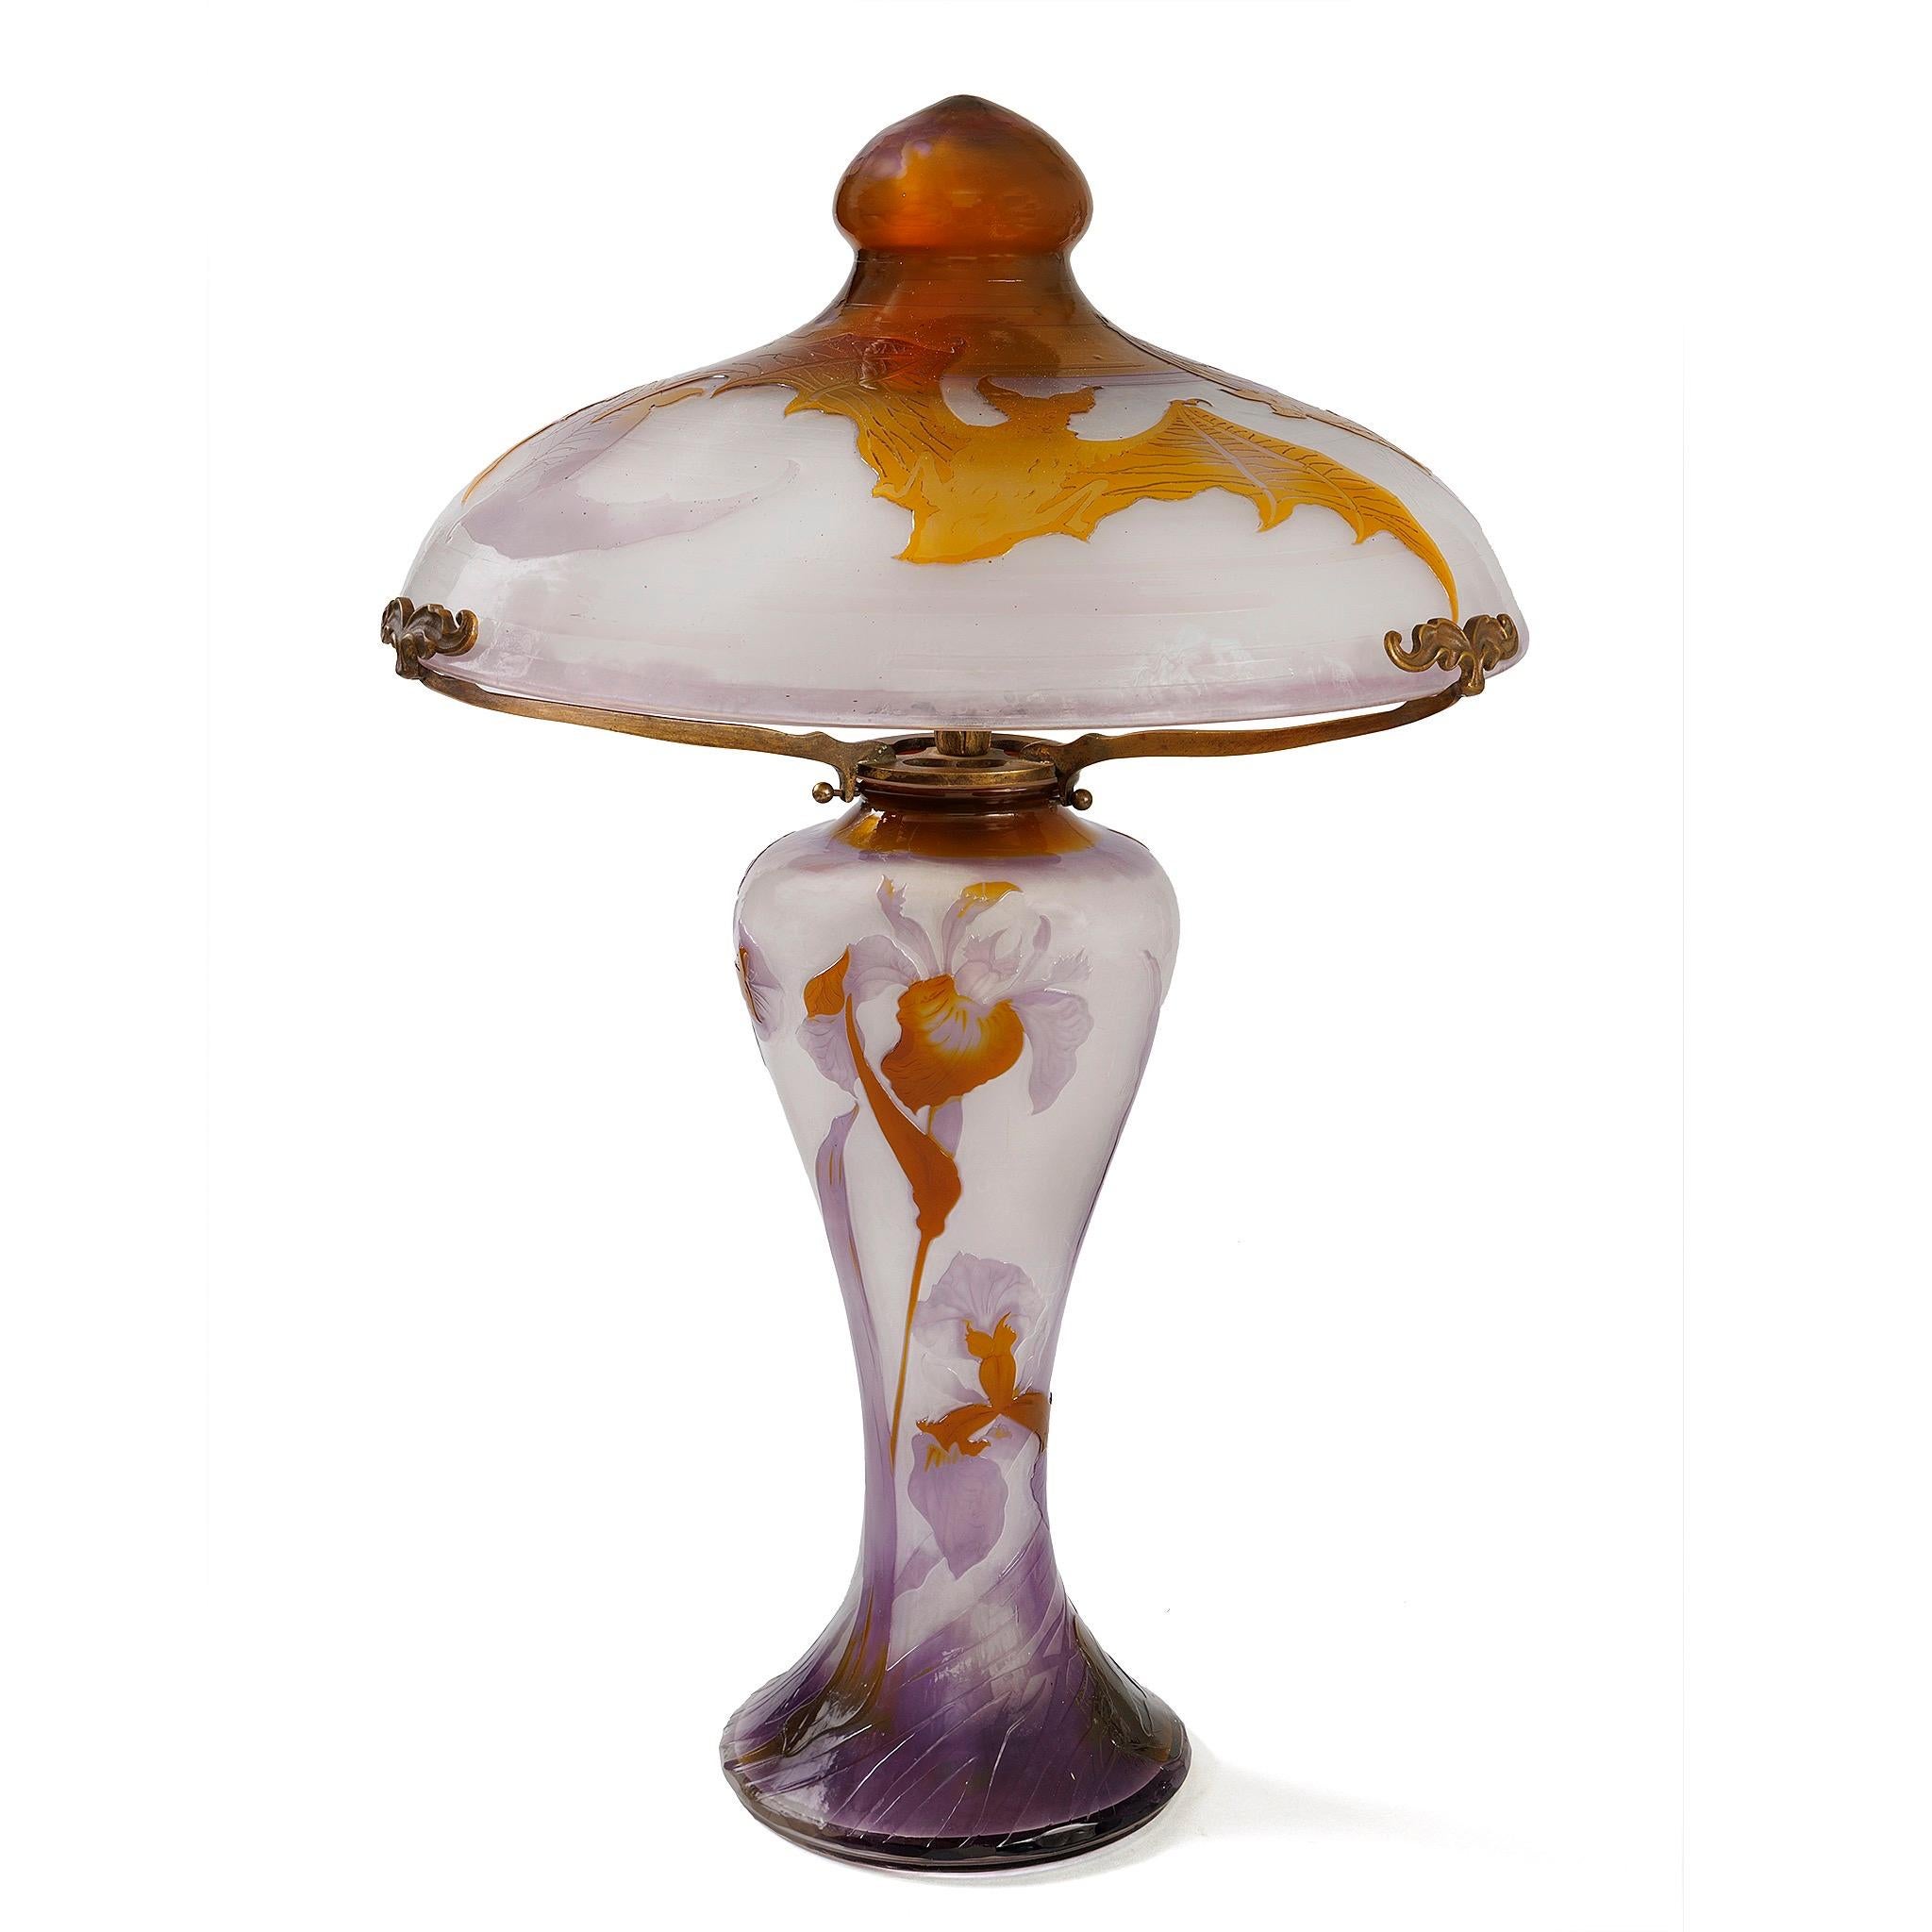 This exquisite Galle bat lamp is crafted from three-color cameo glass, featuring a delicate lavender-hued shade adorned with a golden finial, held aloft by three bronze arms with floral finials. The base is decorated with a series of sensitively